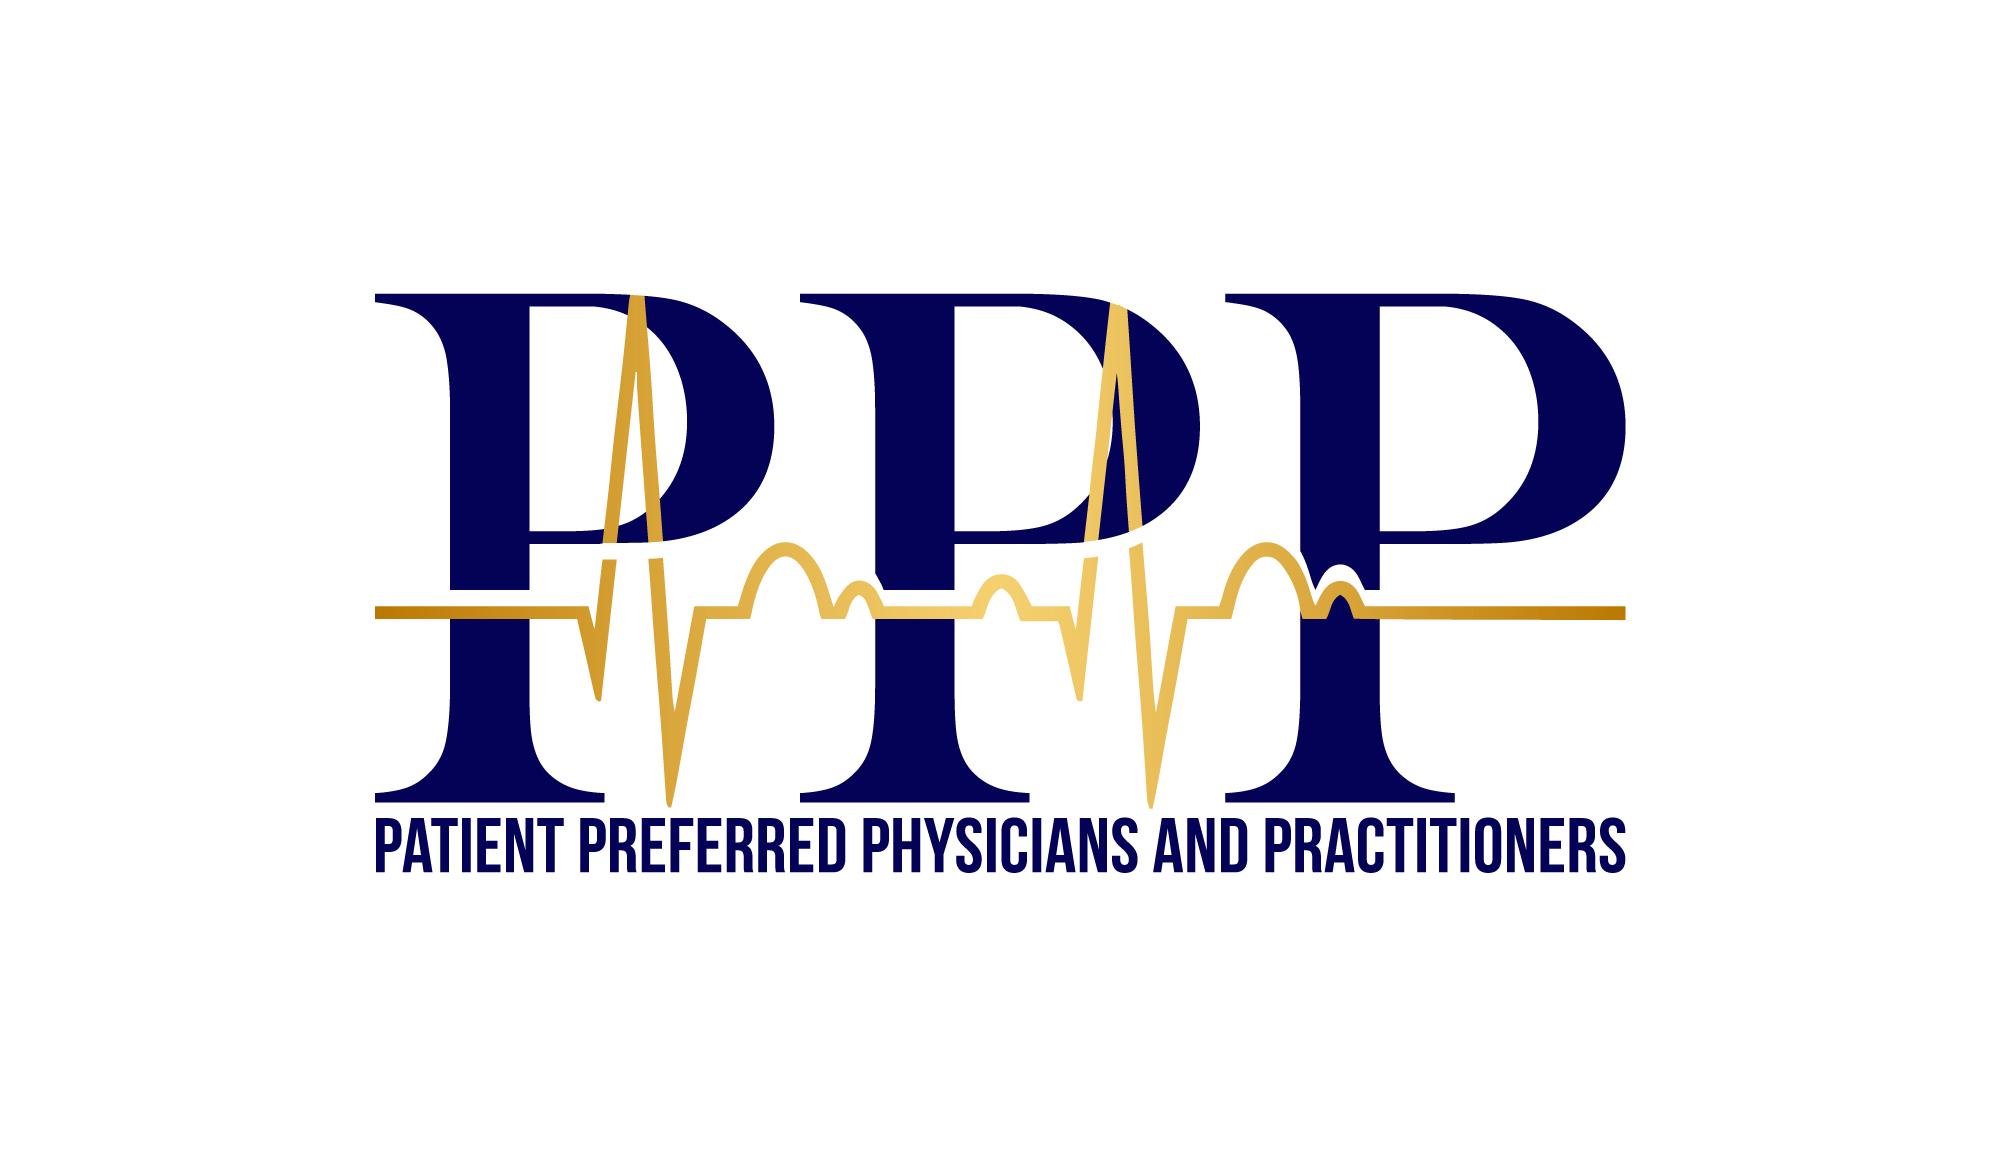 Patient Preferred Physicians & Practitioners profile on Qualified.One